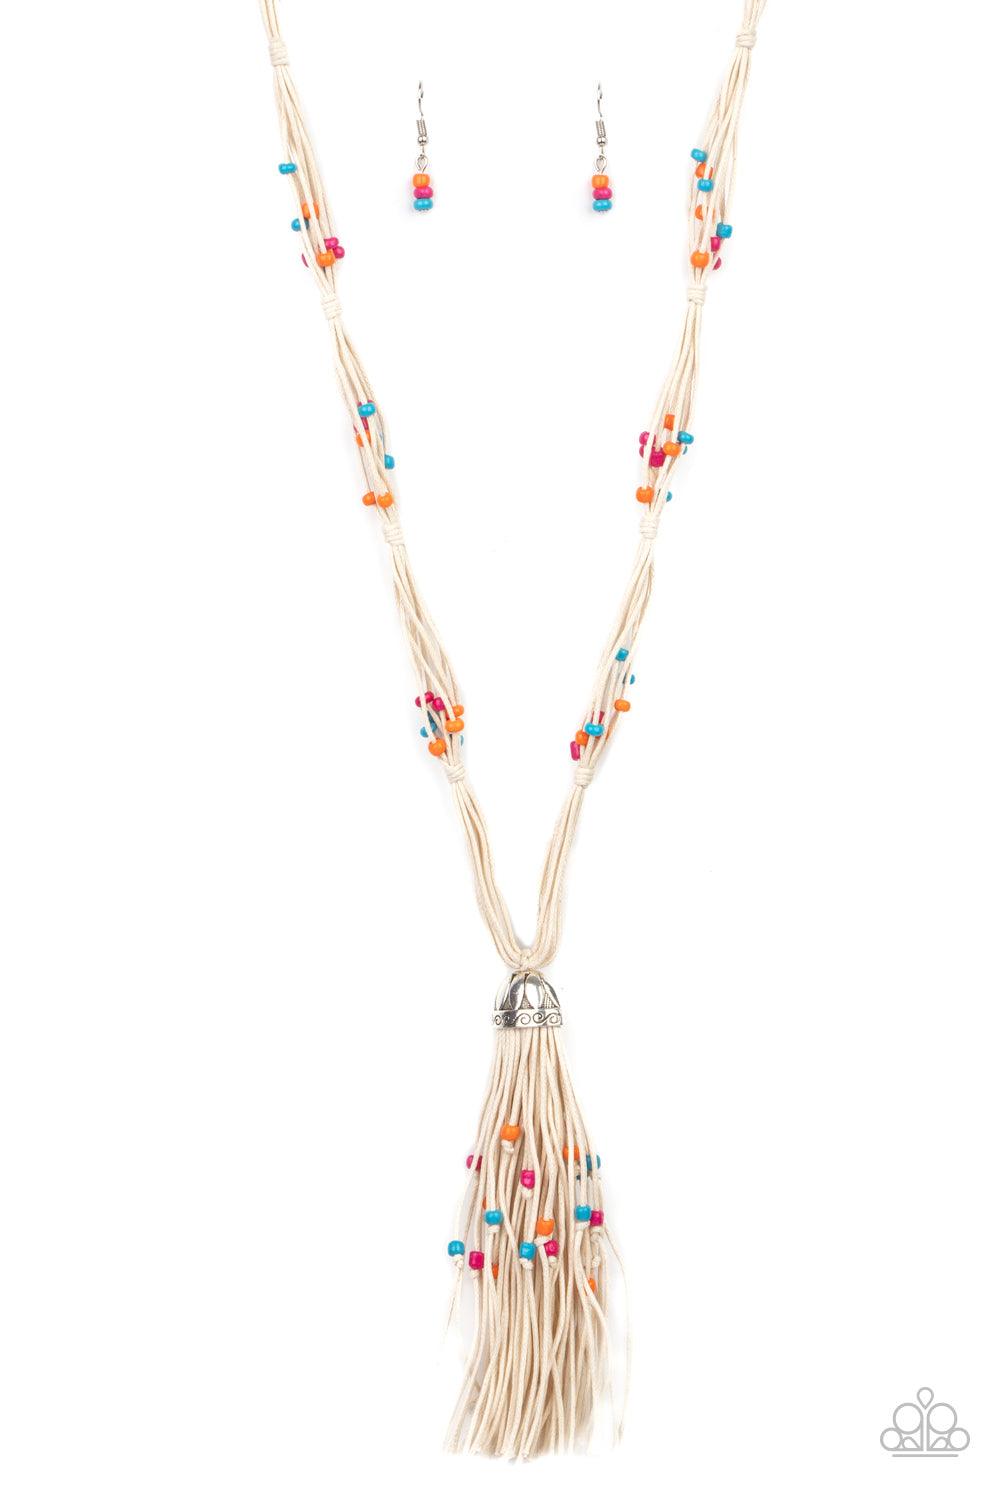 Paparazzi Accessories Summery Sensations - Multi Dainty orange, blue, and pink wooden beads are sporadically threaded along earthy strands of knotted twine-like layers draped across the chest. Matching beaded strands stream out from the bottom of a decora